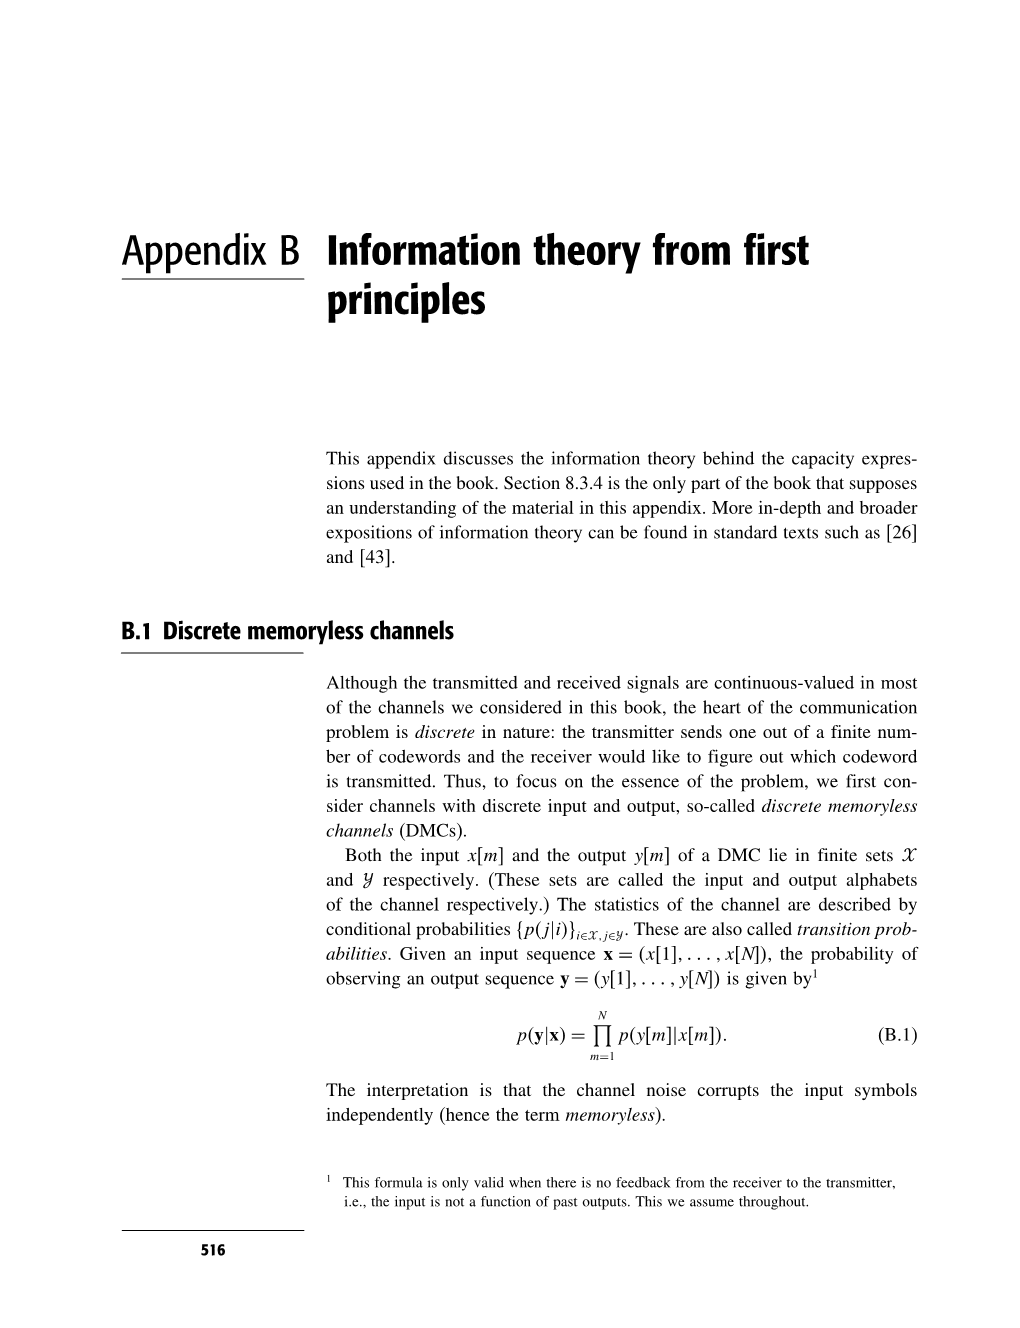 Appendix B Information Theory from First Principles